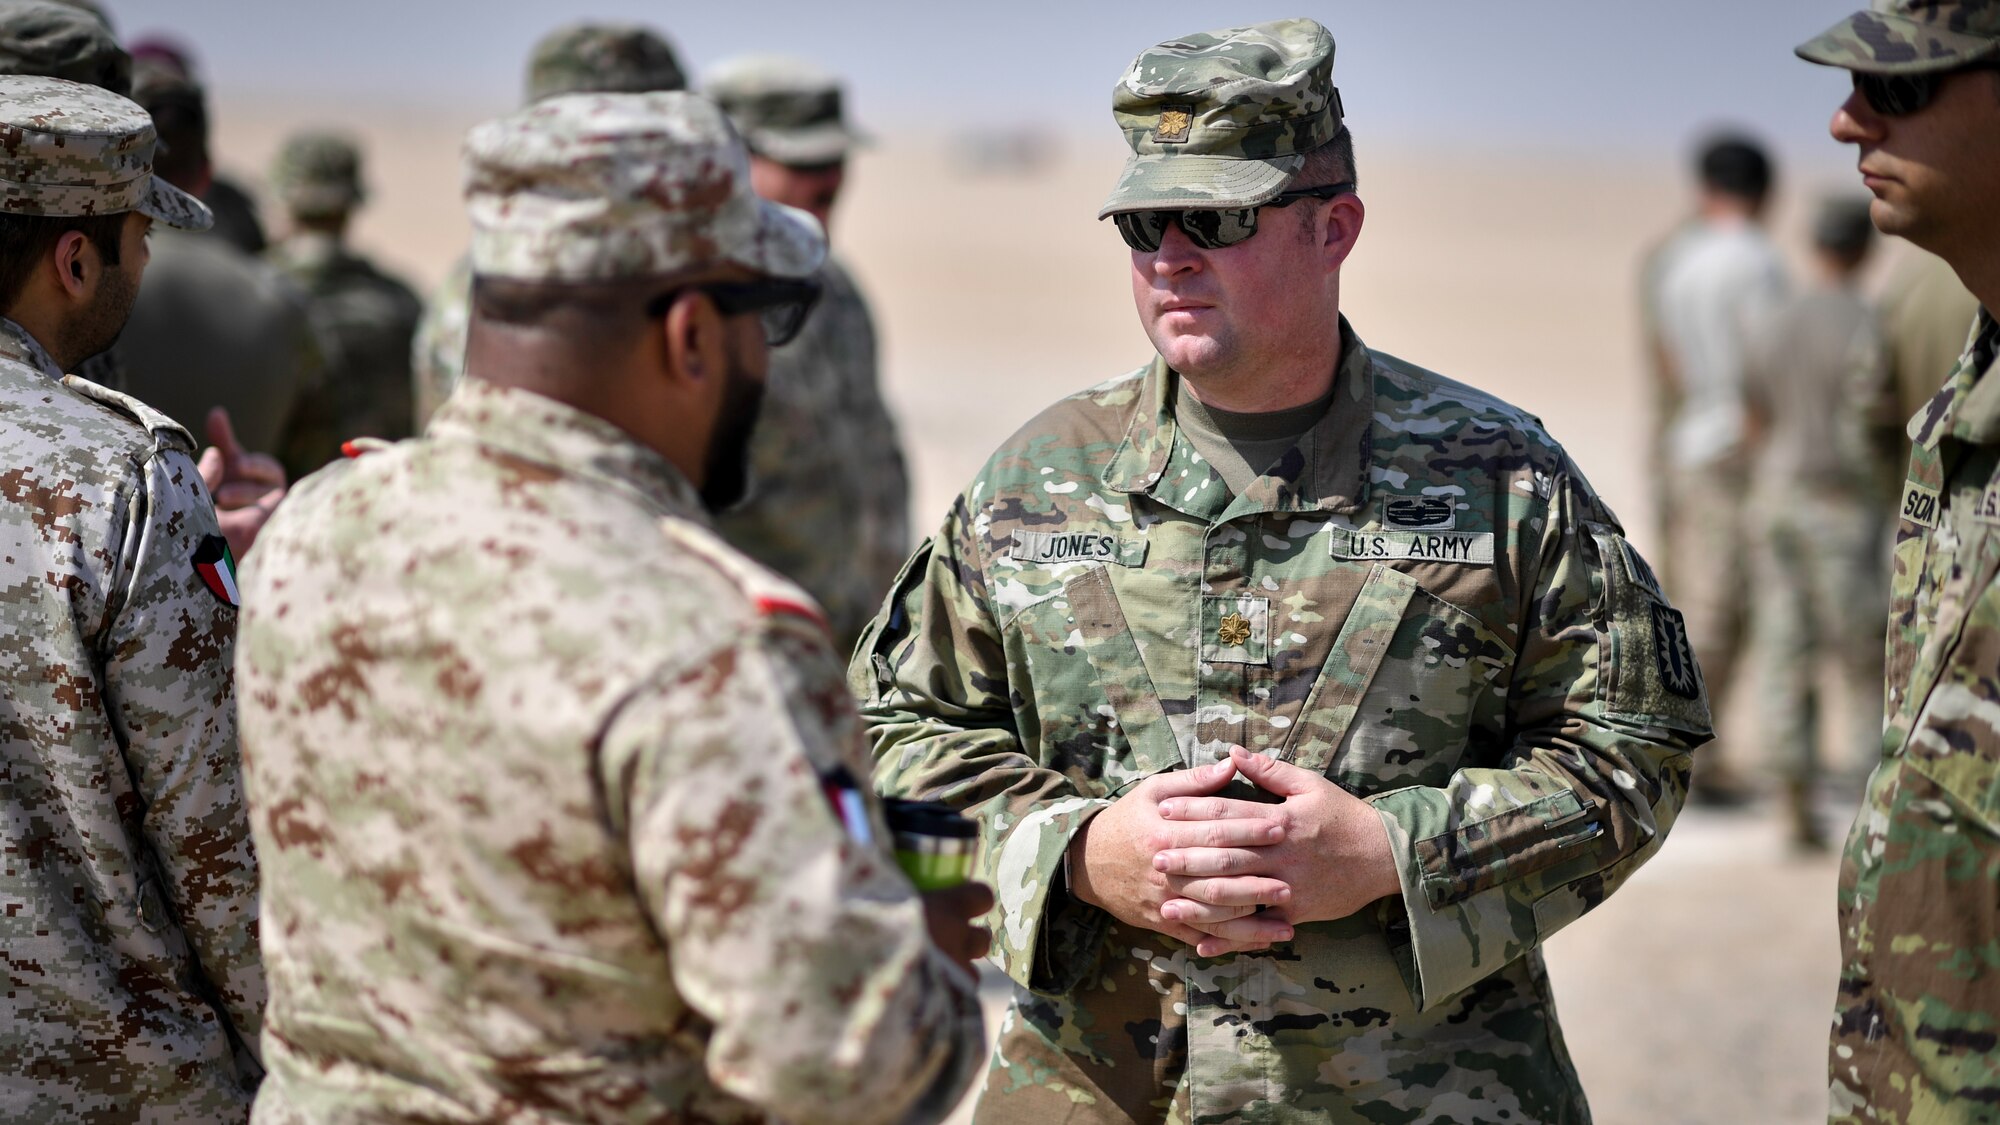 U.S. Army Maj. Darrell Jones, Forensic Exploitation Laboratory Central Command director, meets with Kuwaiti Ministry of Defense EOD technicians before an insensitive munitions disposal training at the Udari Range, Kuwait, Sept. 30, 2019. The training was designed for U.S. and Kuwaiti forces to share techniques, synchronize capabilities and build partnerships.